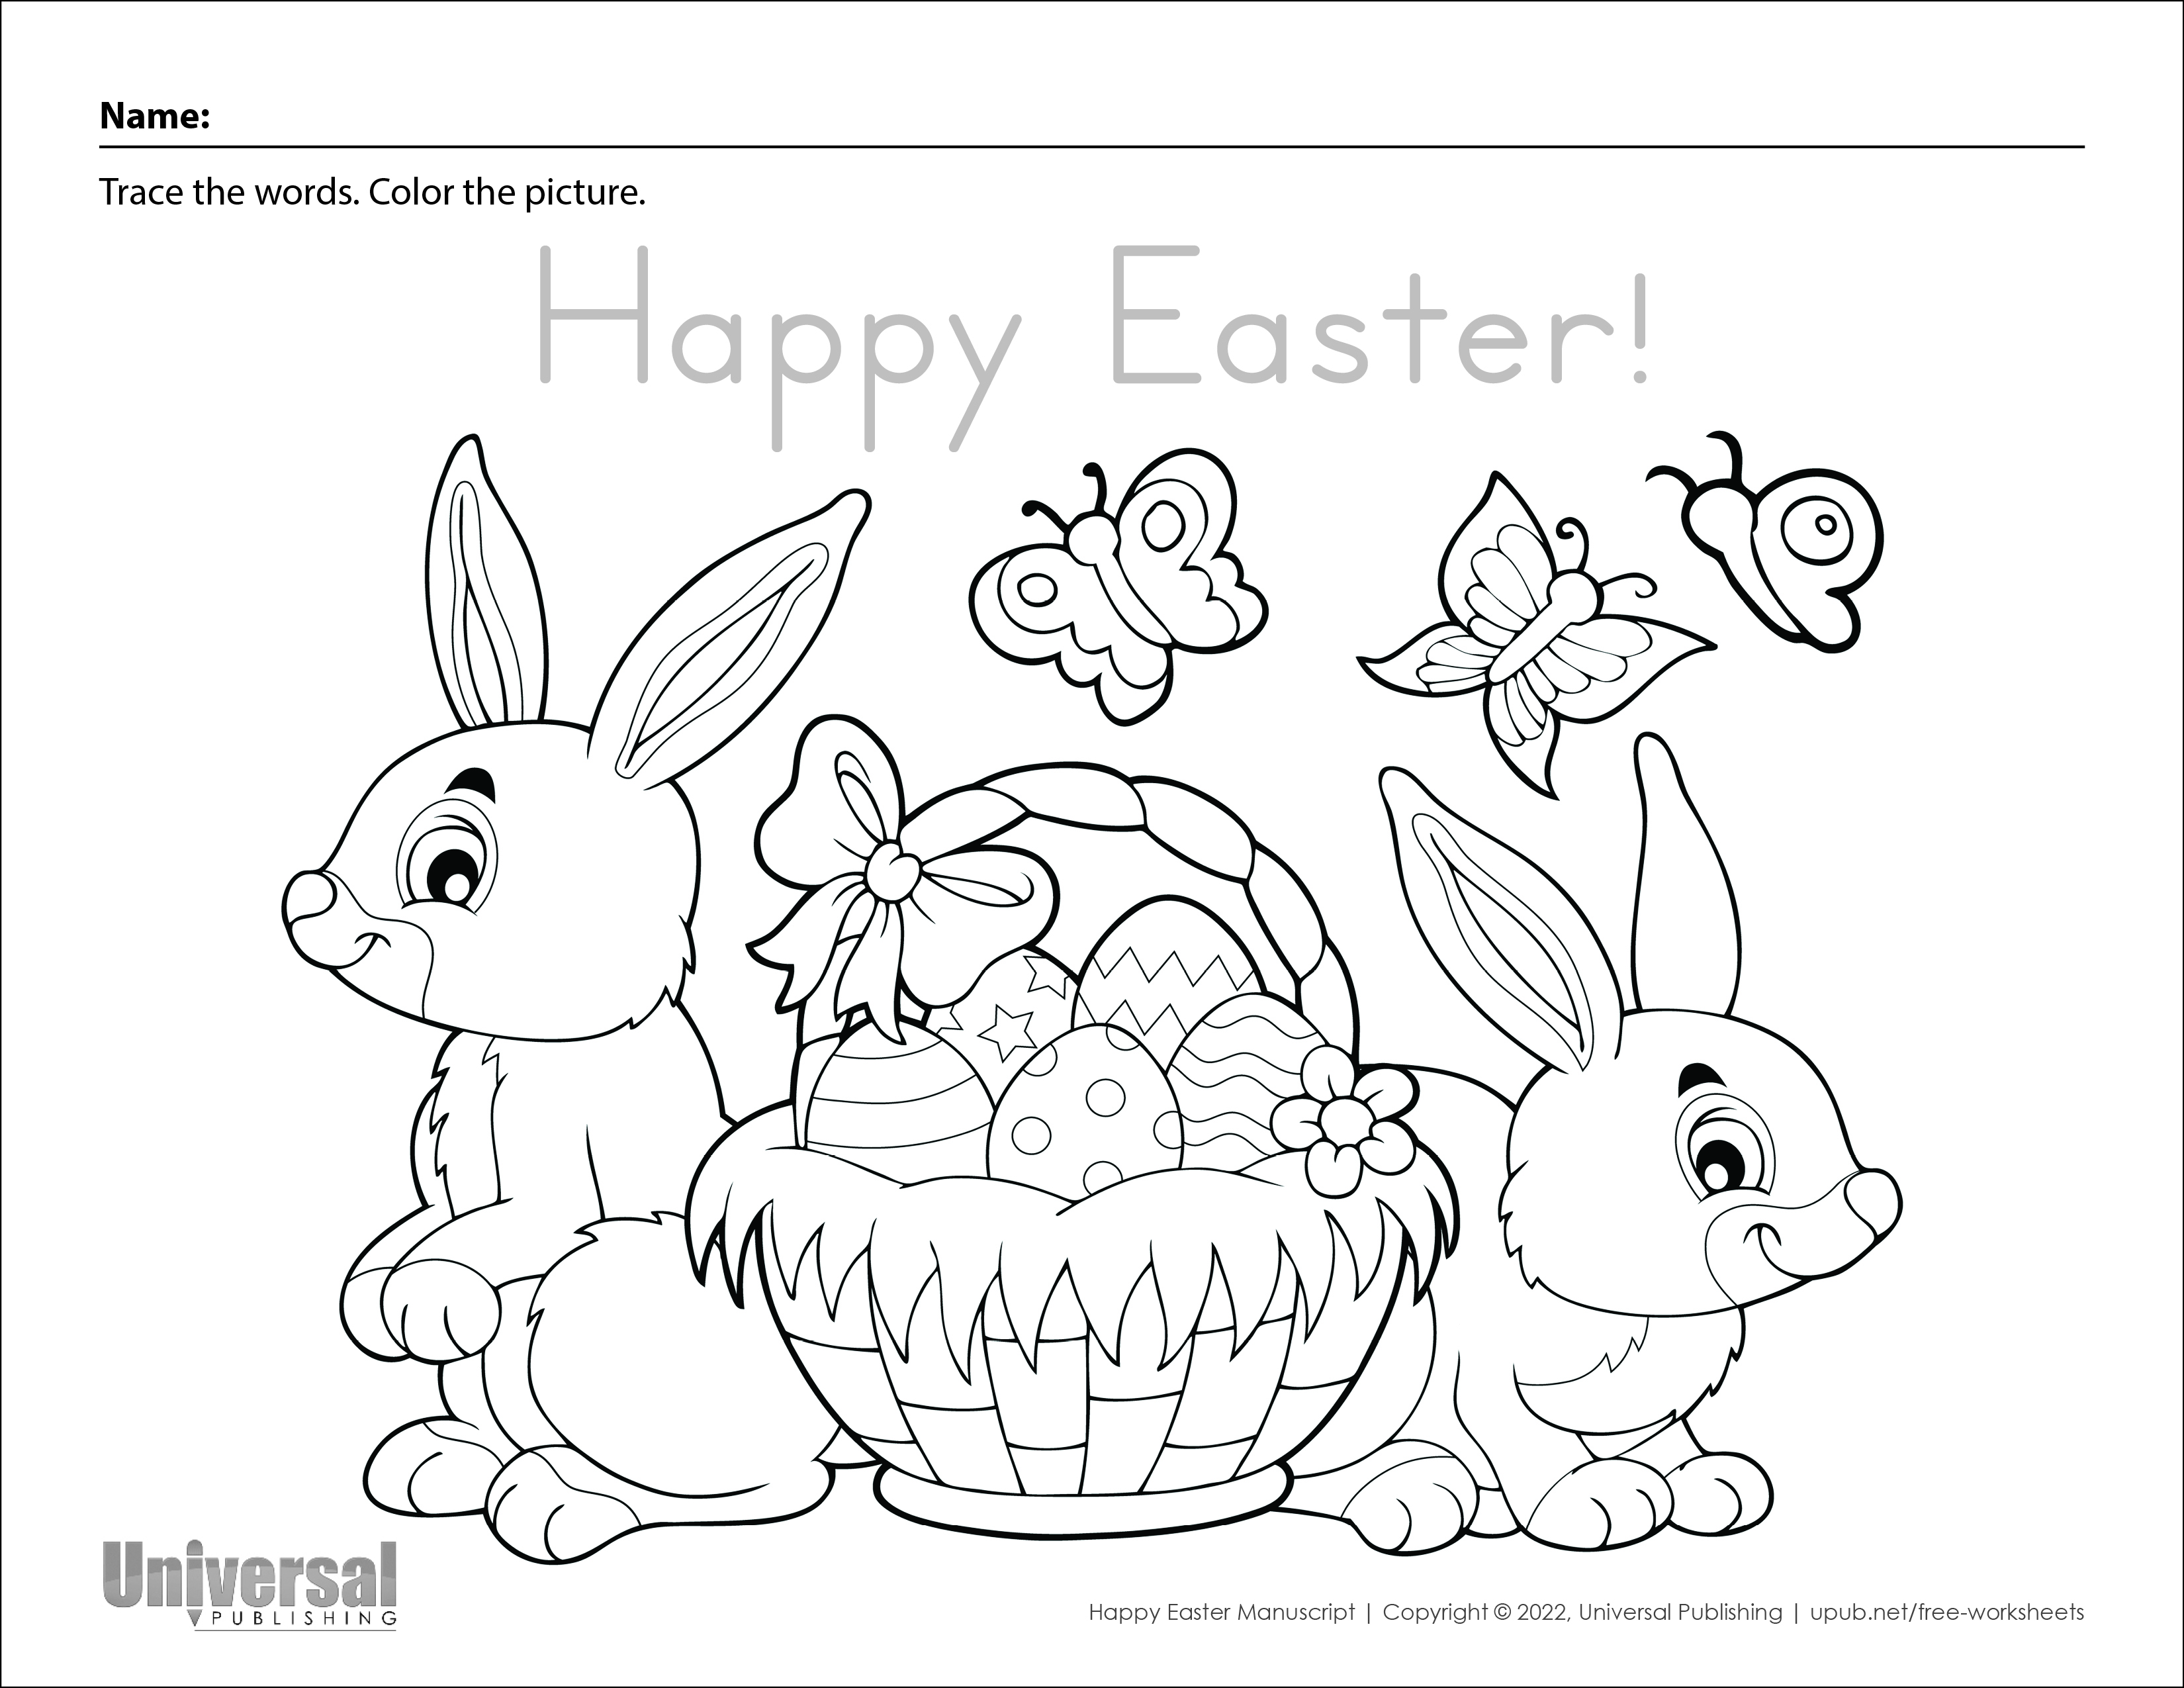 Happy Easter Trace and Color Activity (Manuscript)